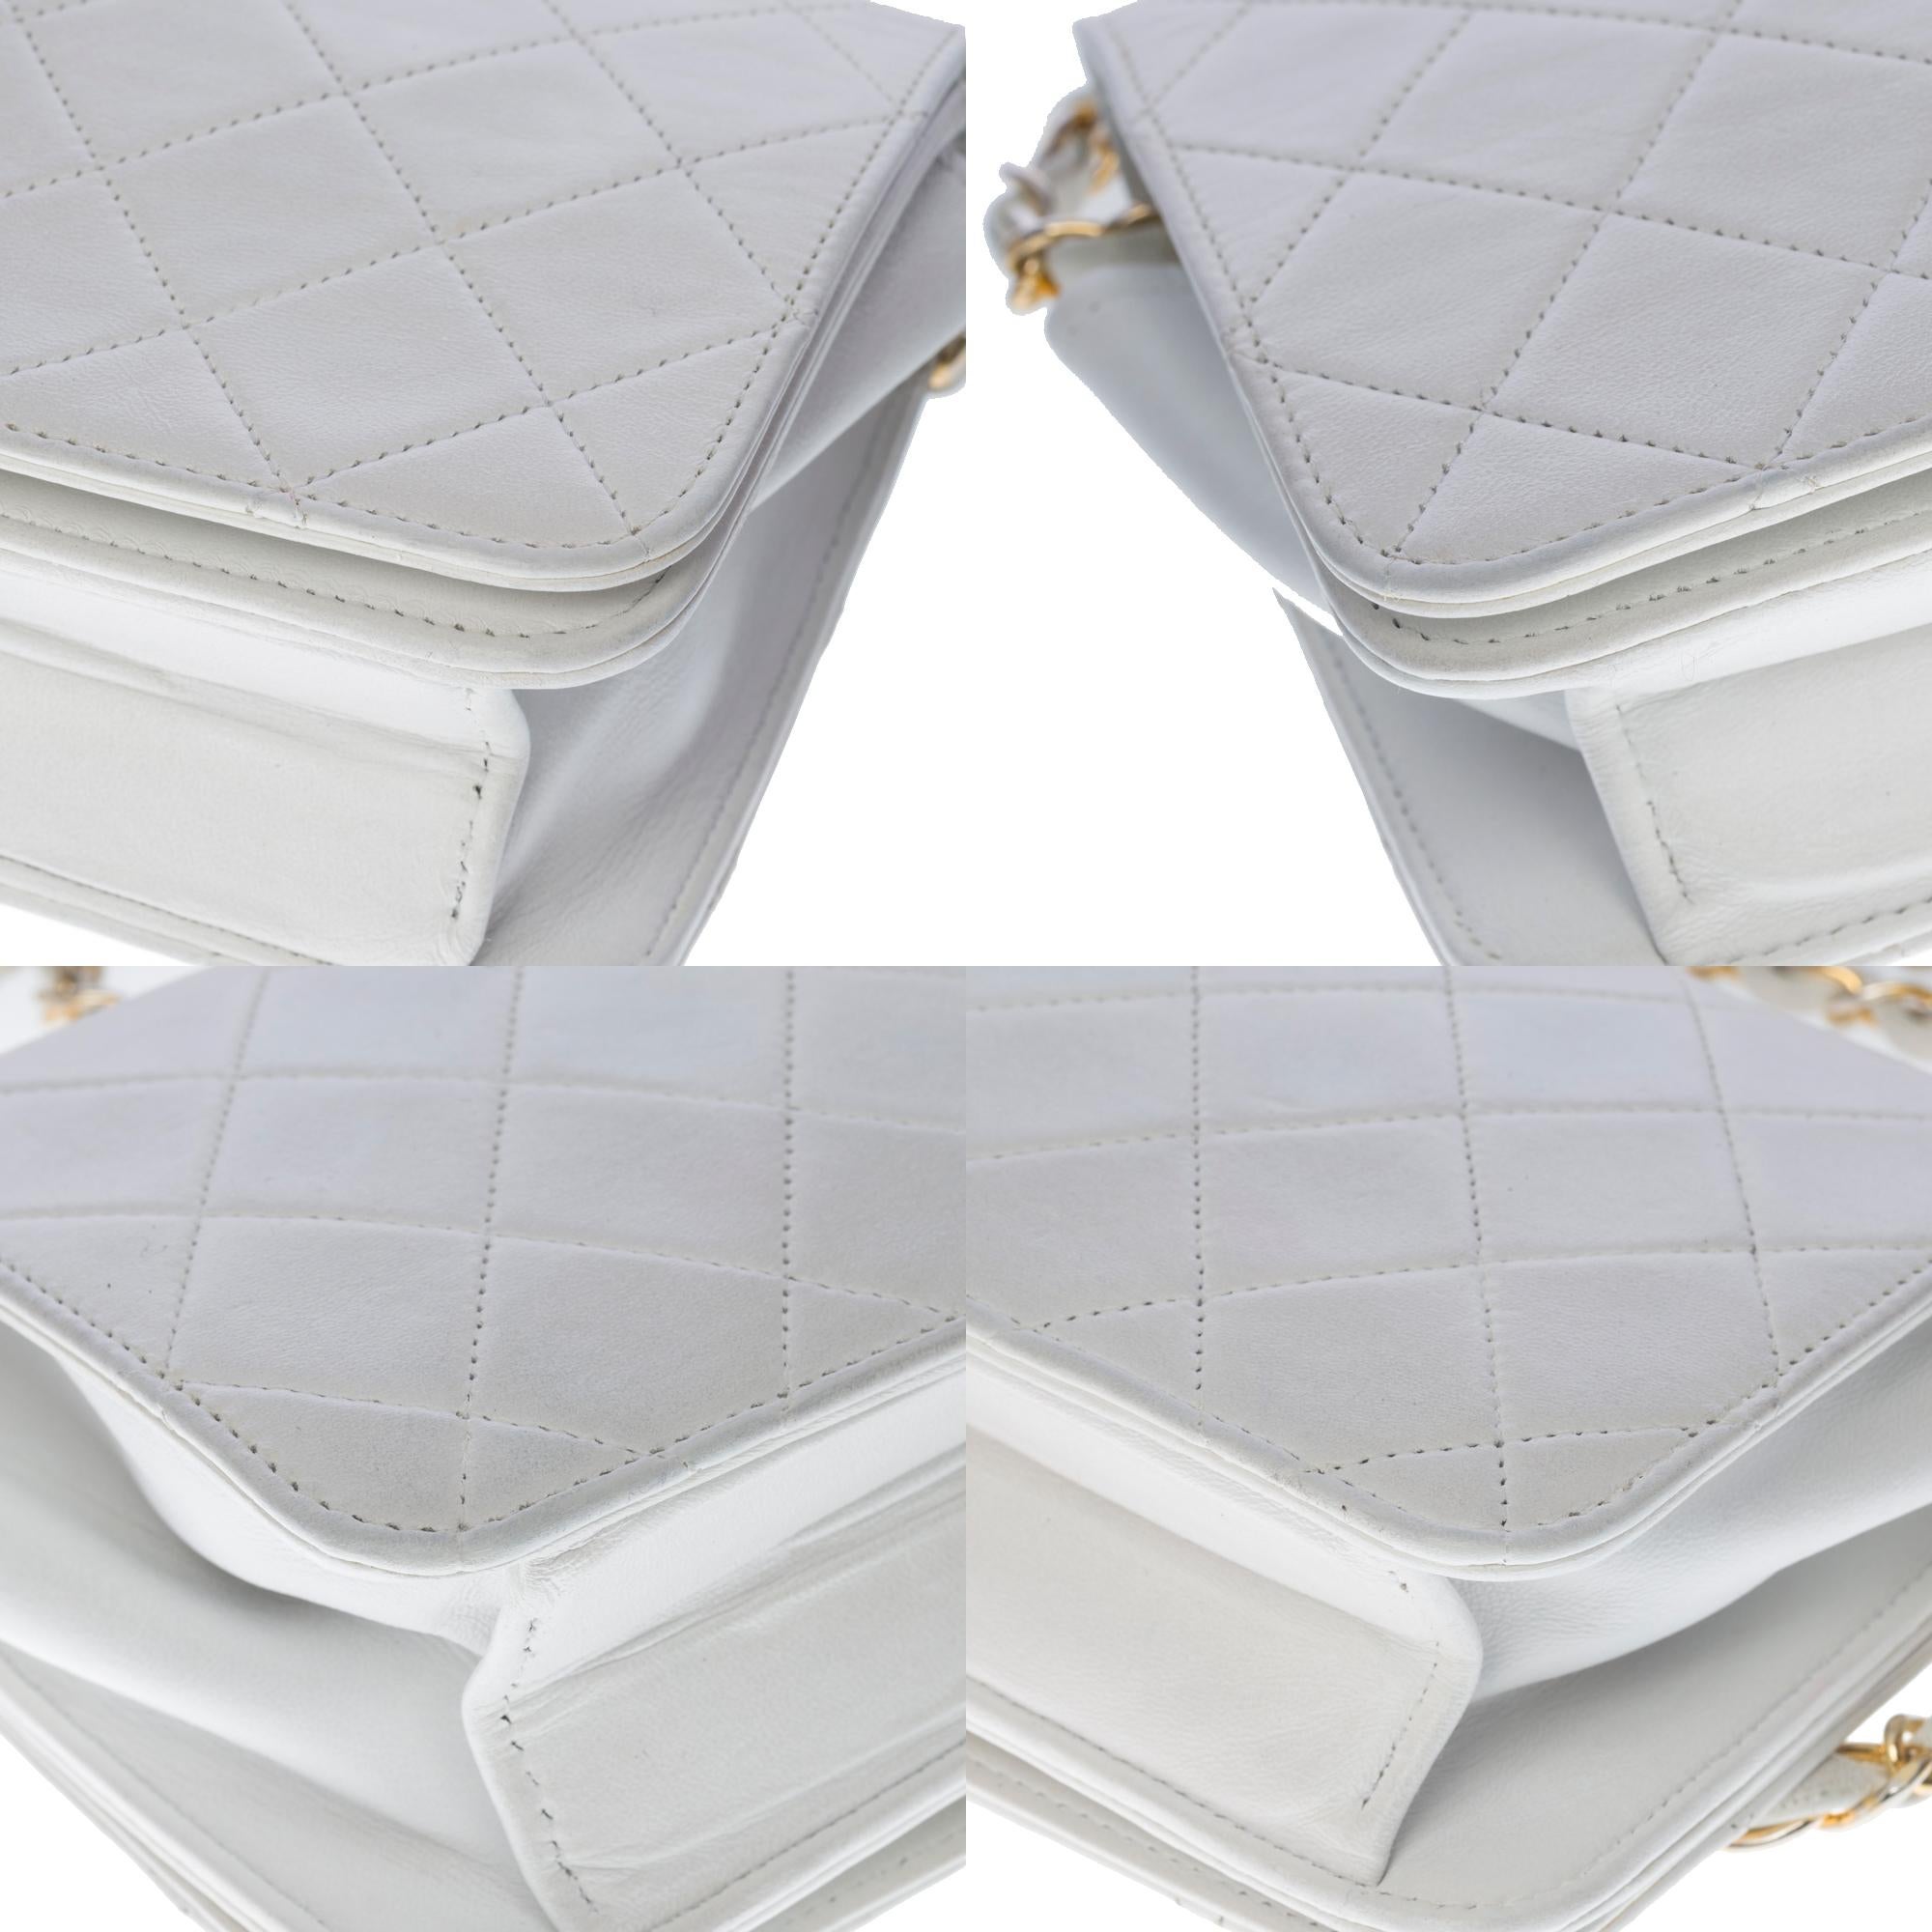 Chanel Full flap Mini shoulder bag in white quilted lambskin, GHW 5